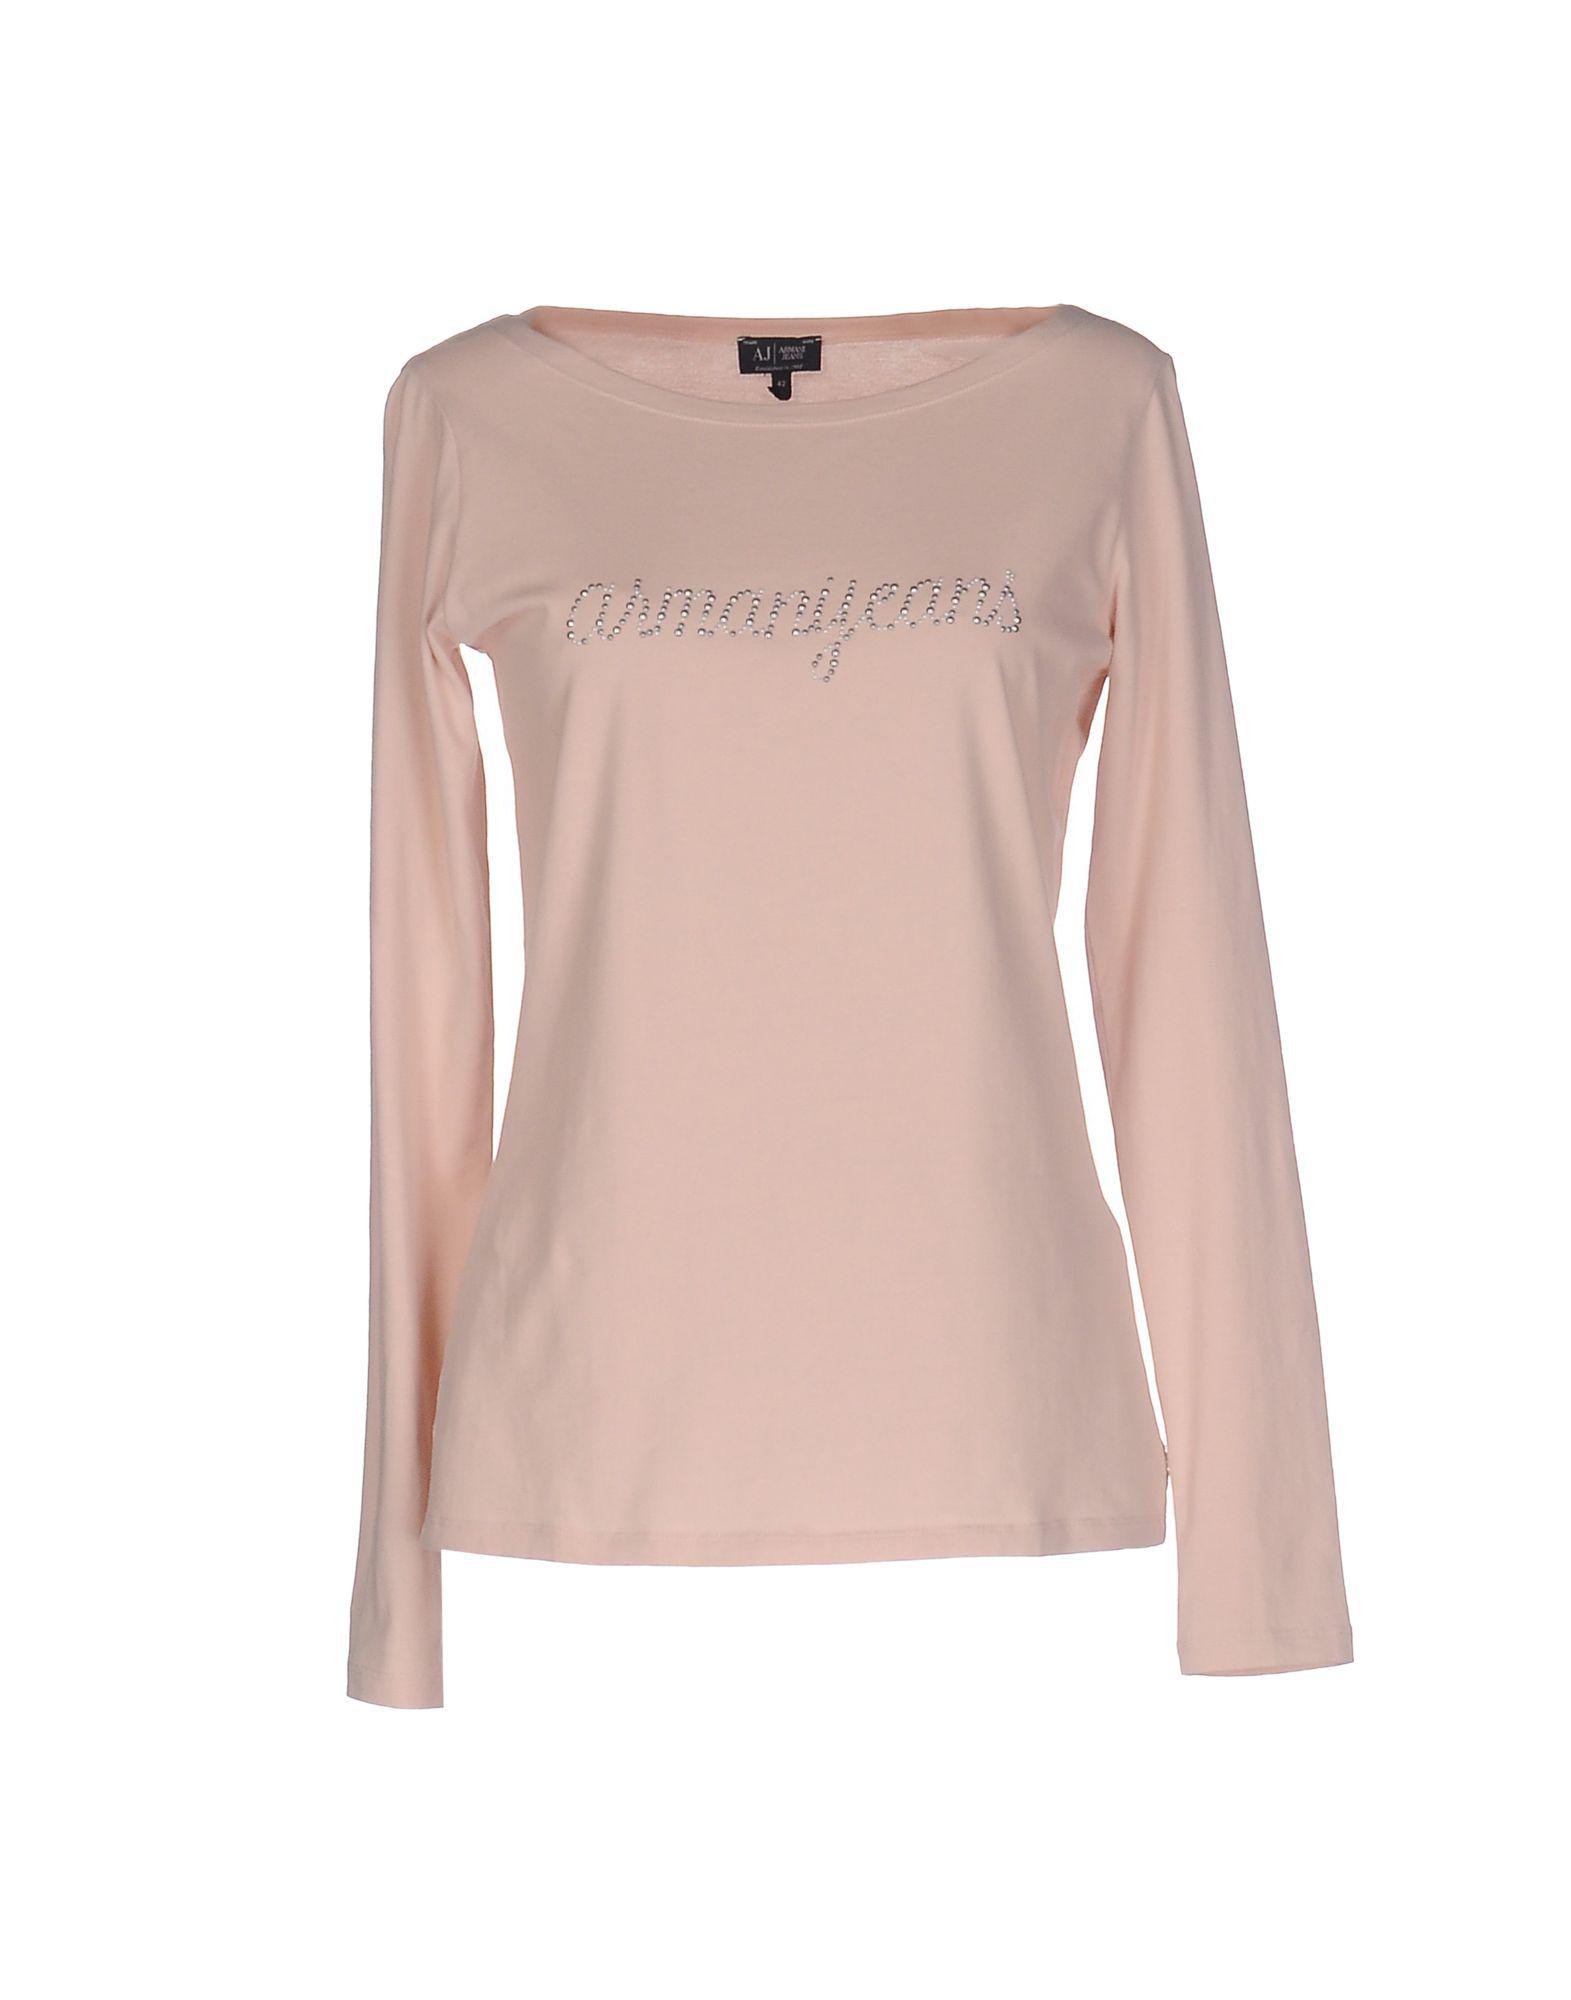 Lyst - Armani Jeans T-shirt in Pink